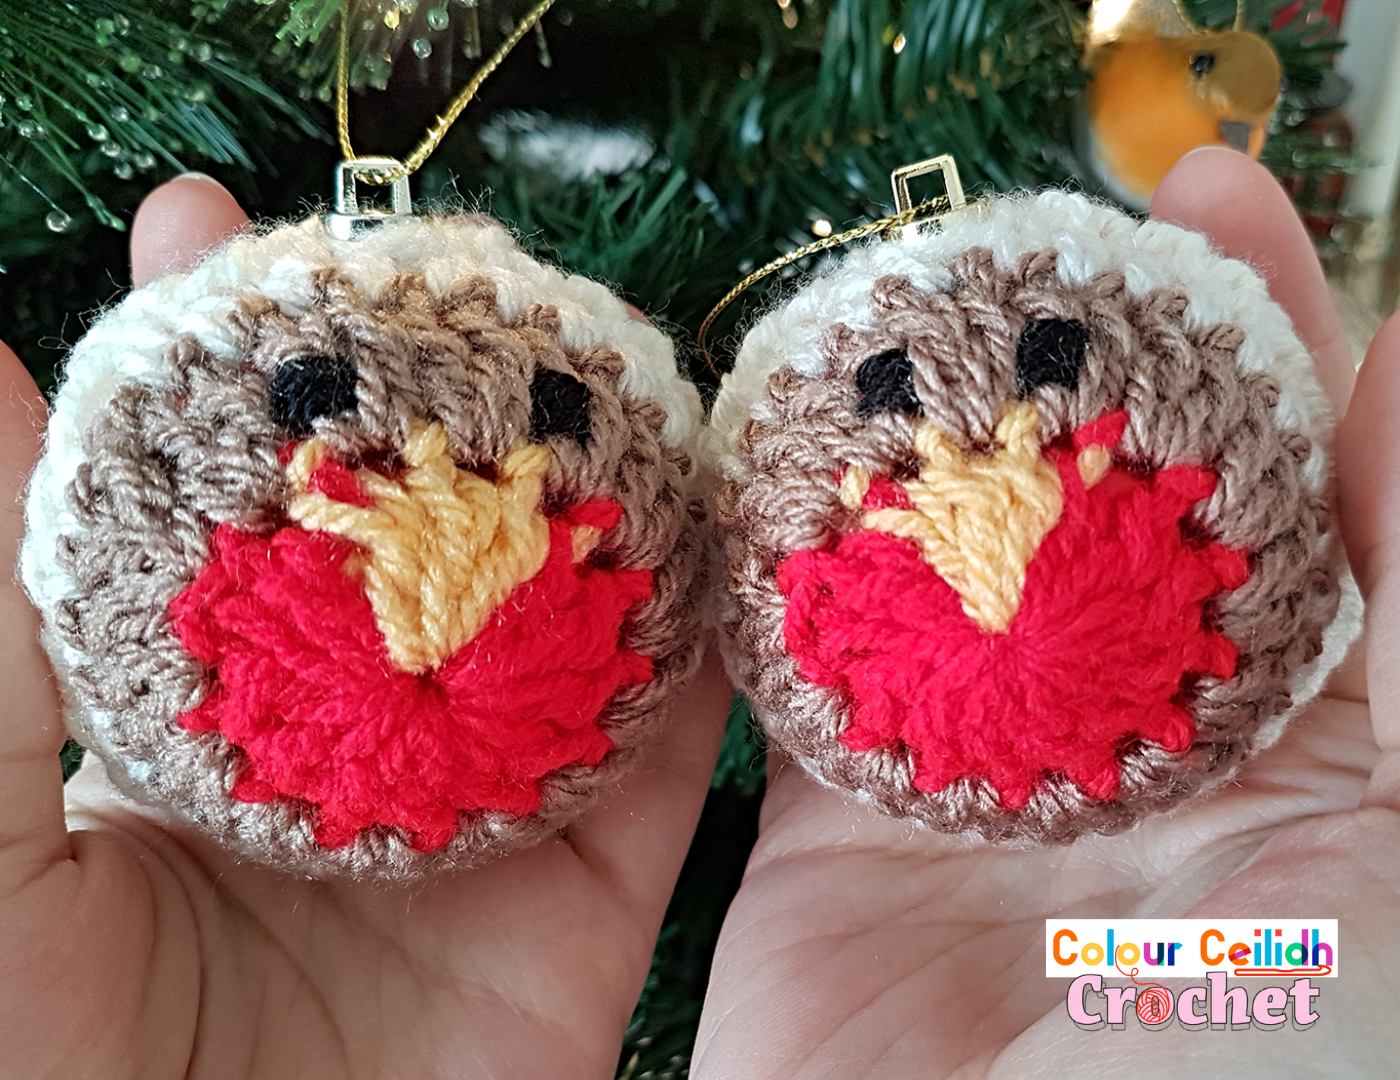 This crochet robin bauble is a crochet bauble cover for your unwanted Christmas baubles! This crochet robin bauble is only three rounds and is made with double crochet stitches. And double crochet means easy crochet for beginners!